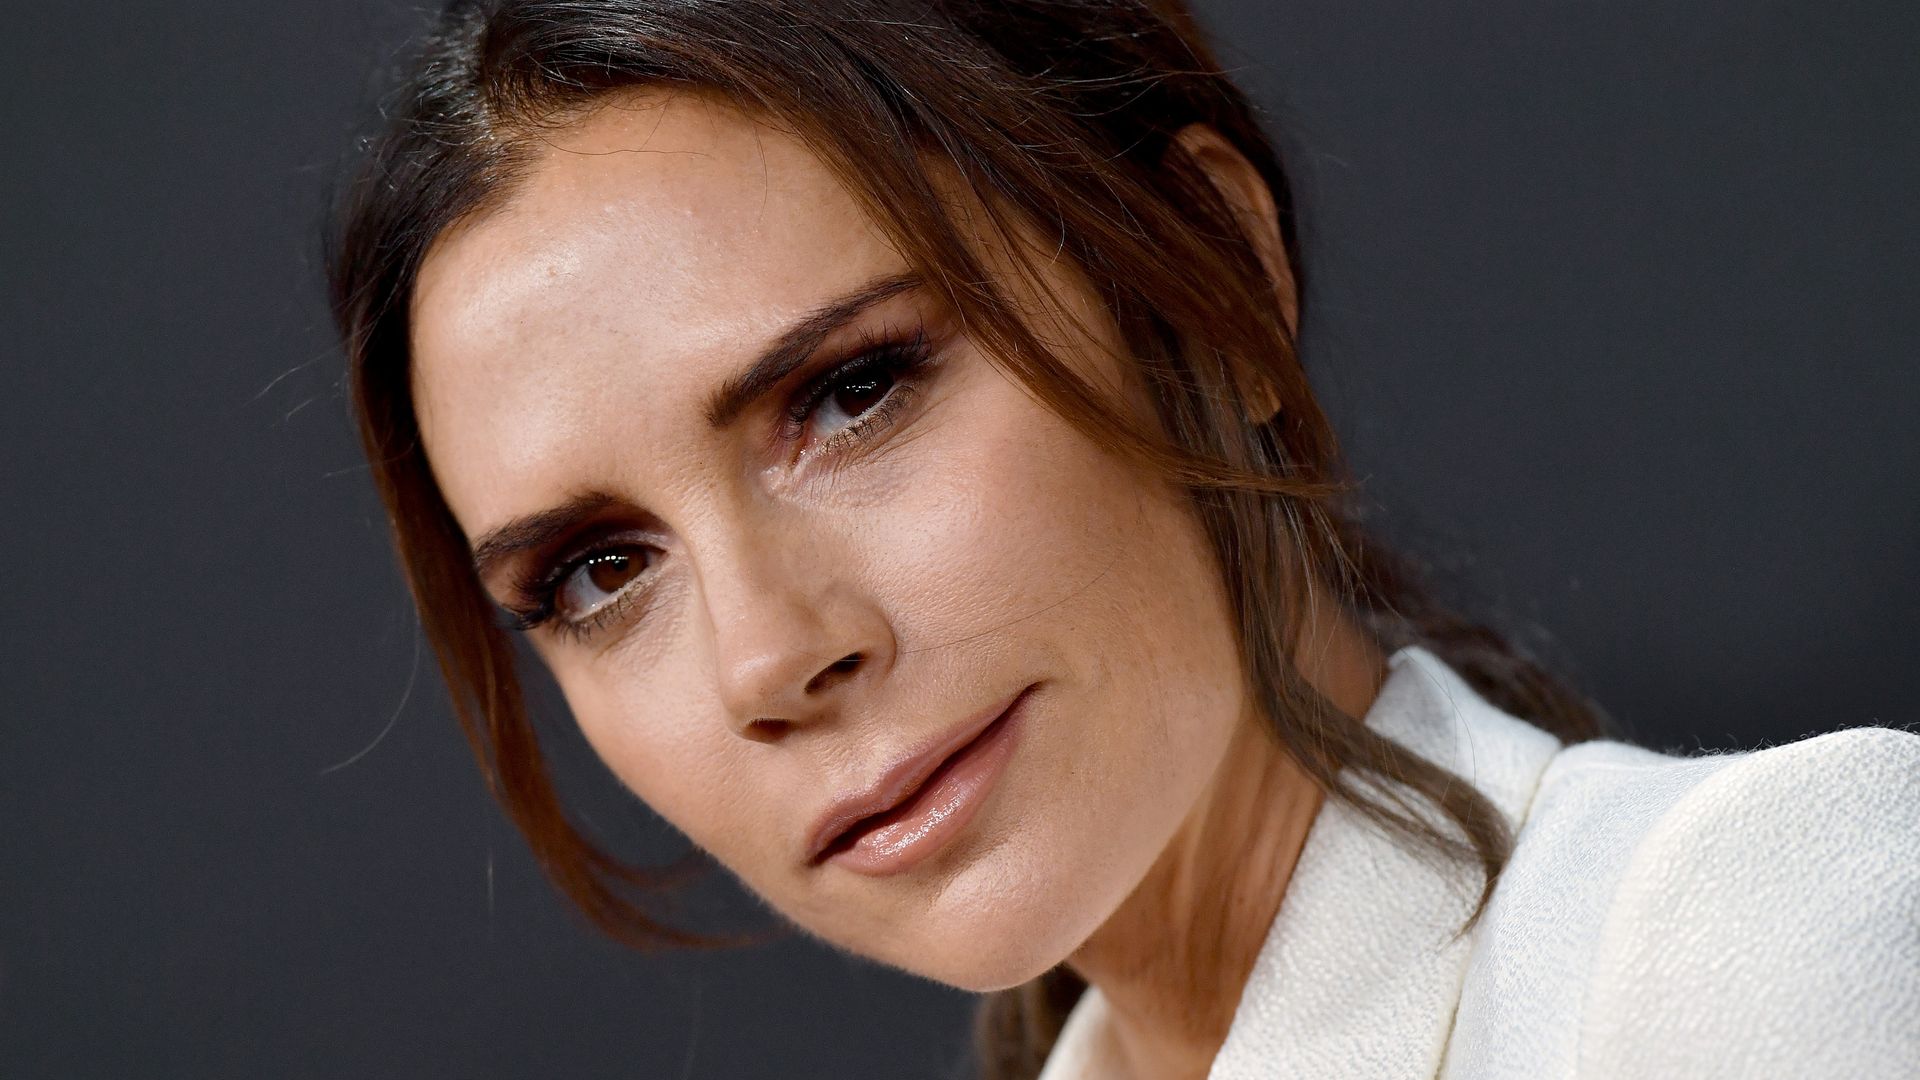 Victoria Beckham and sister Louise Adams could be mistaken for twins in incredible photo taken on birthday night out